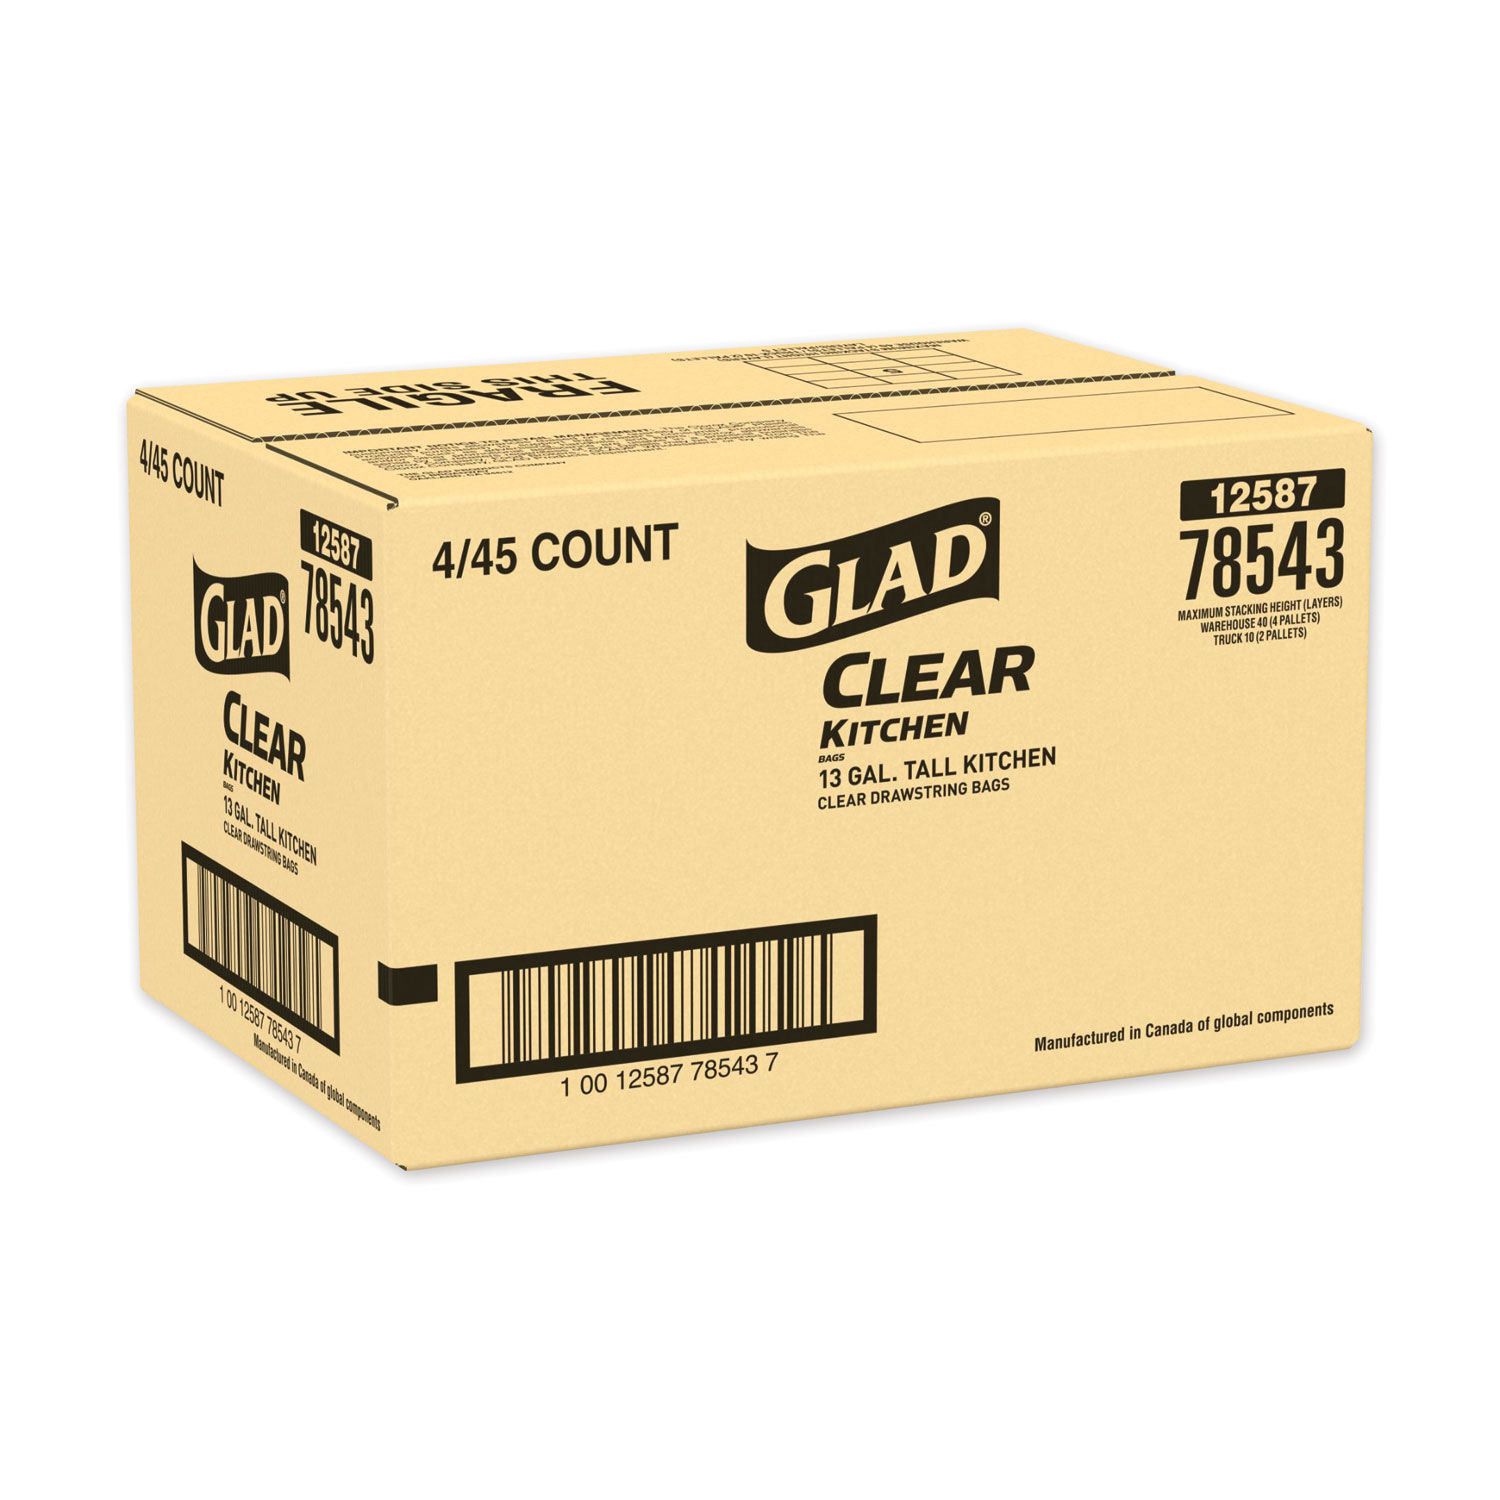 Glad - Glad Clear Kitchen Tall Kitchen 13 Gallon Drawstring Bags 45 Pack  (45 count)